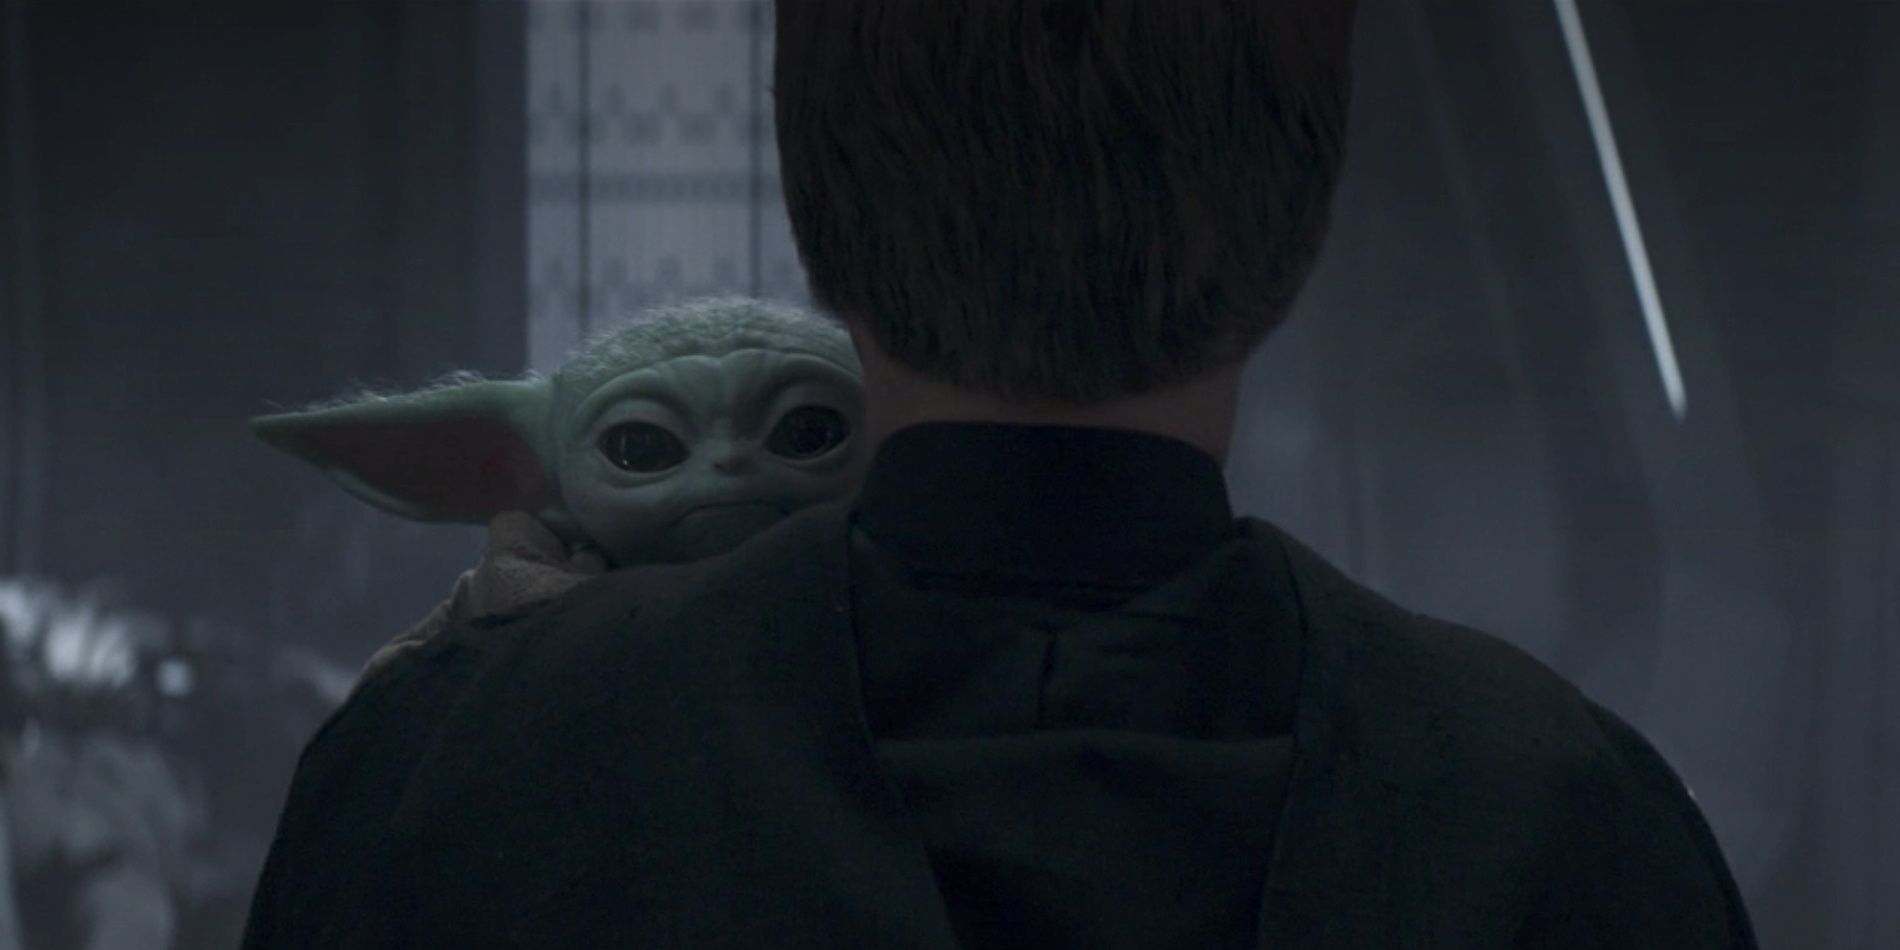 Luke taking Grogu to train him in the Force at the end of season two, episode eight of The Mandalorian